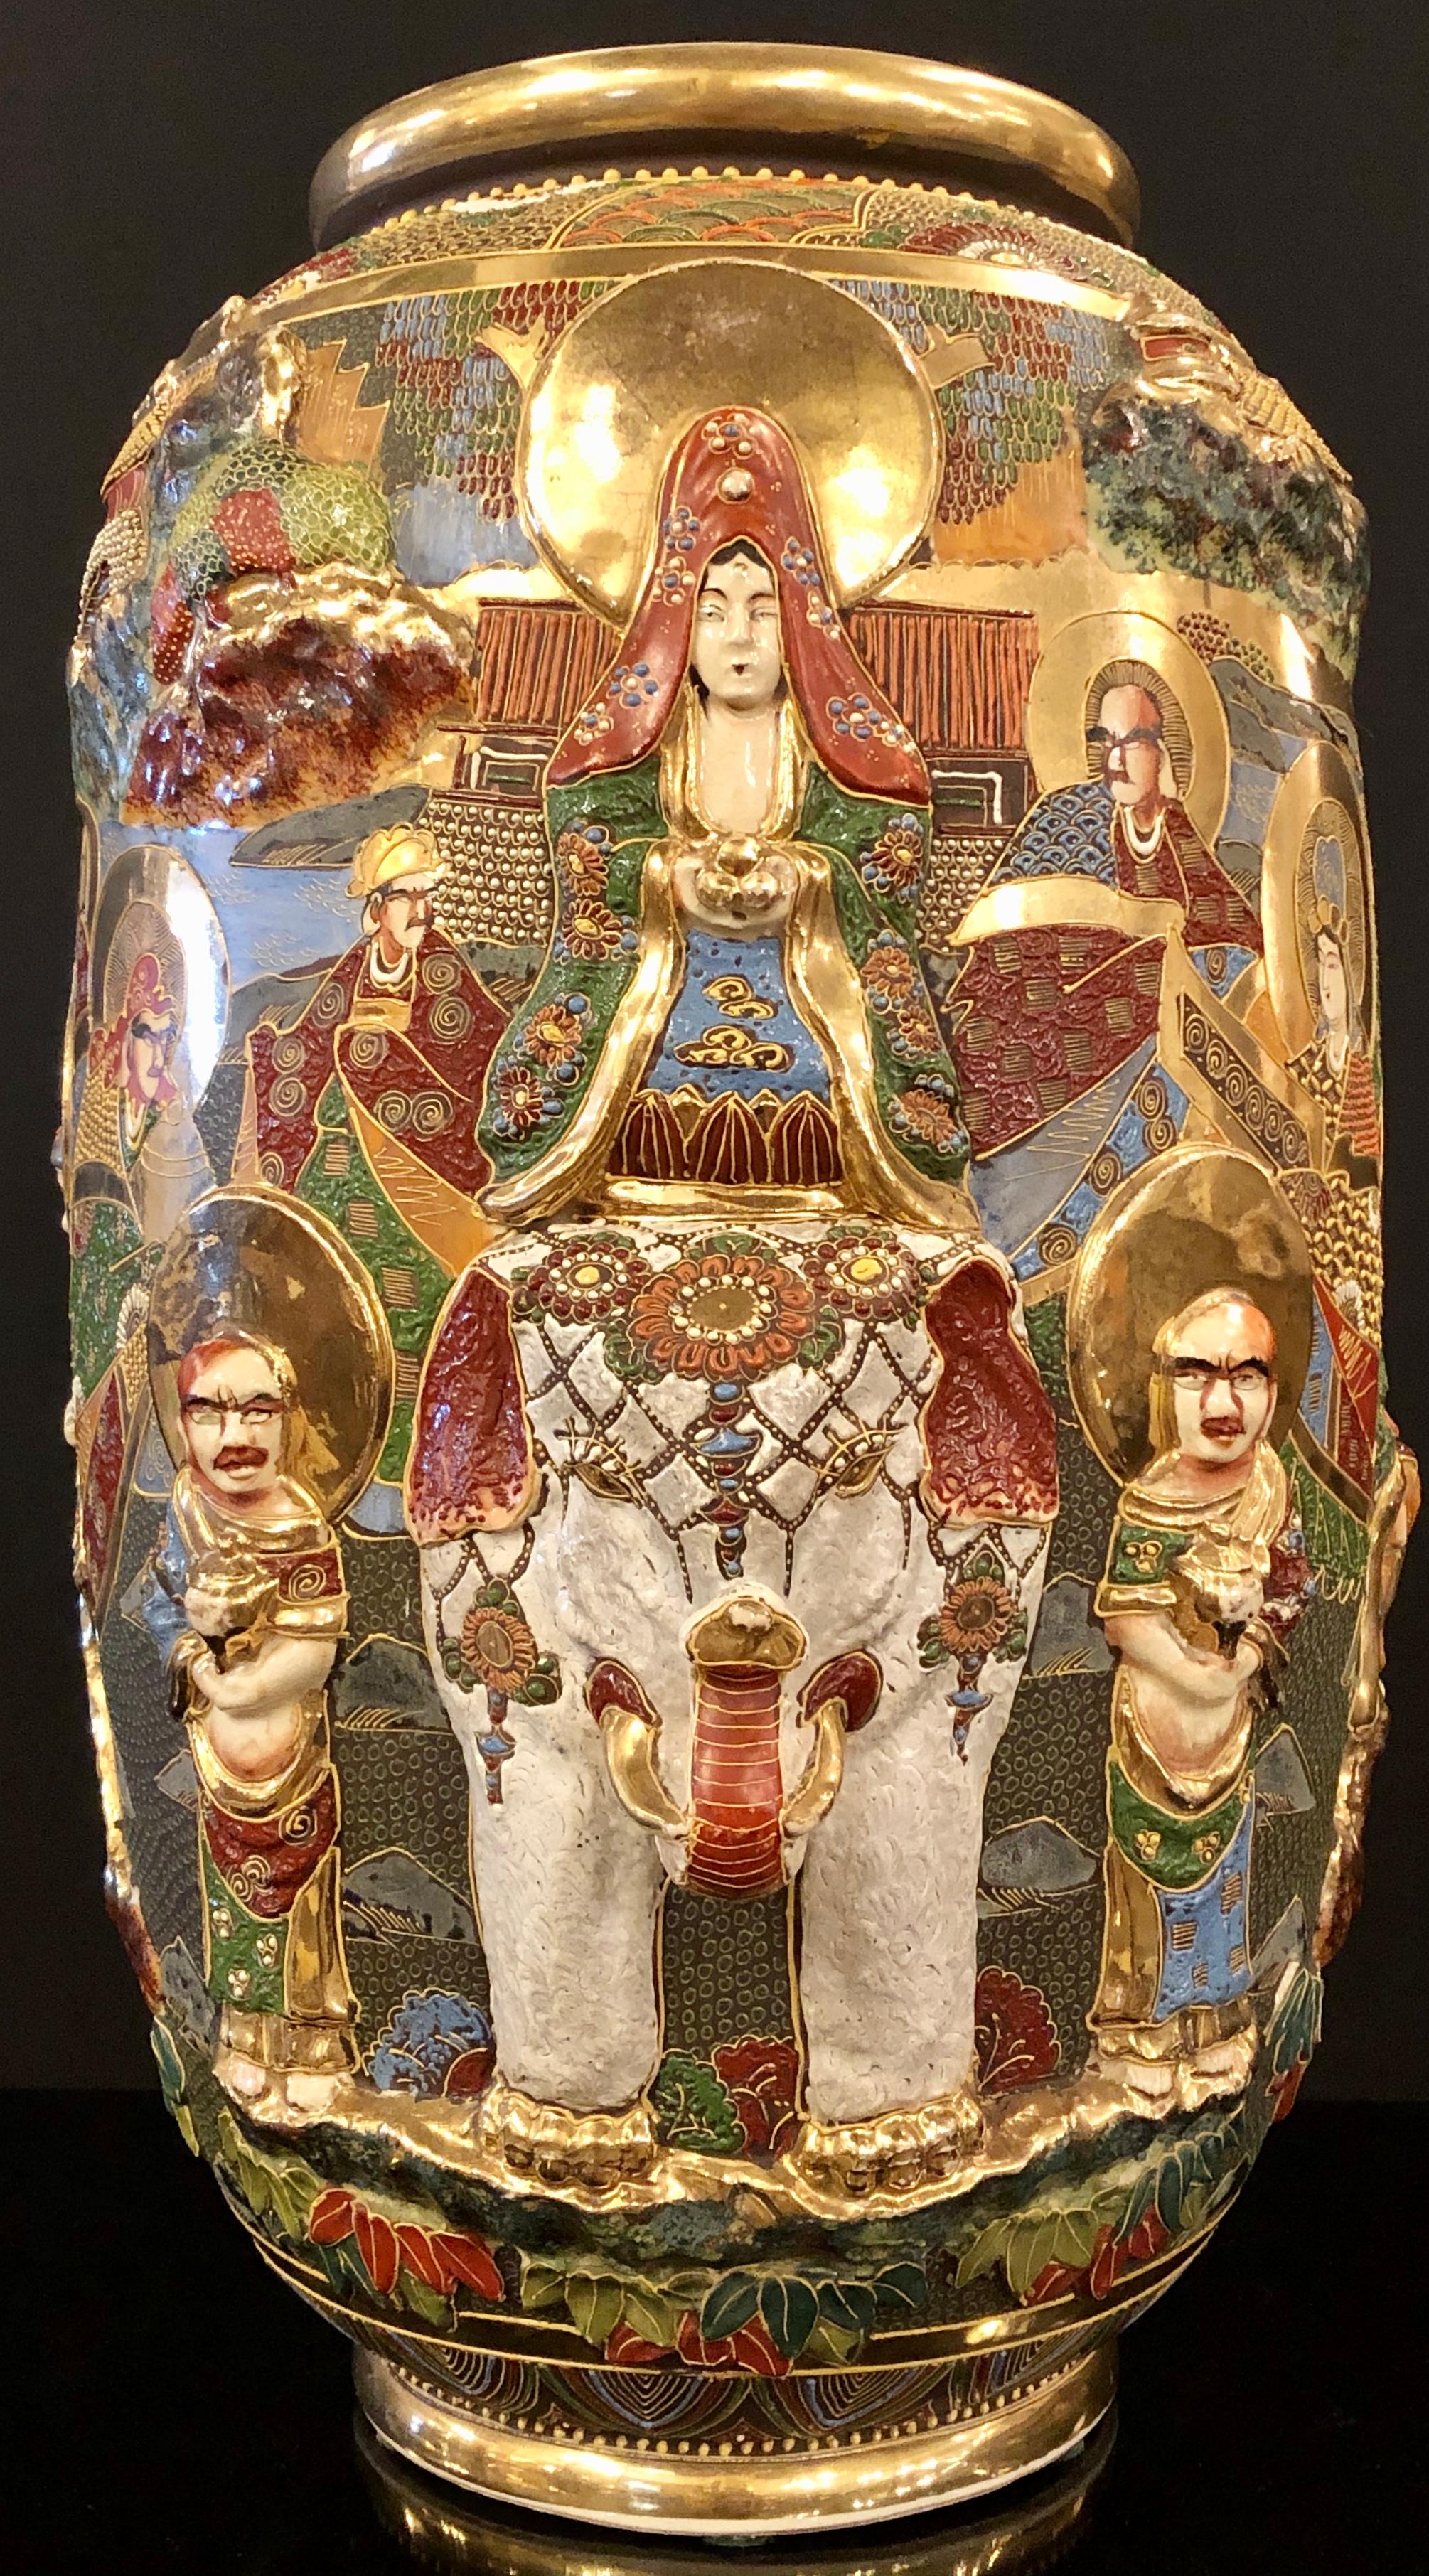 Japanese Satsuma vase with gold gilt high relief decoration with the goddess Quan Yin mounted on a raised elephant. Signed on bottom with signature and label. One of several large decorated vase or urns available.